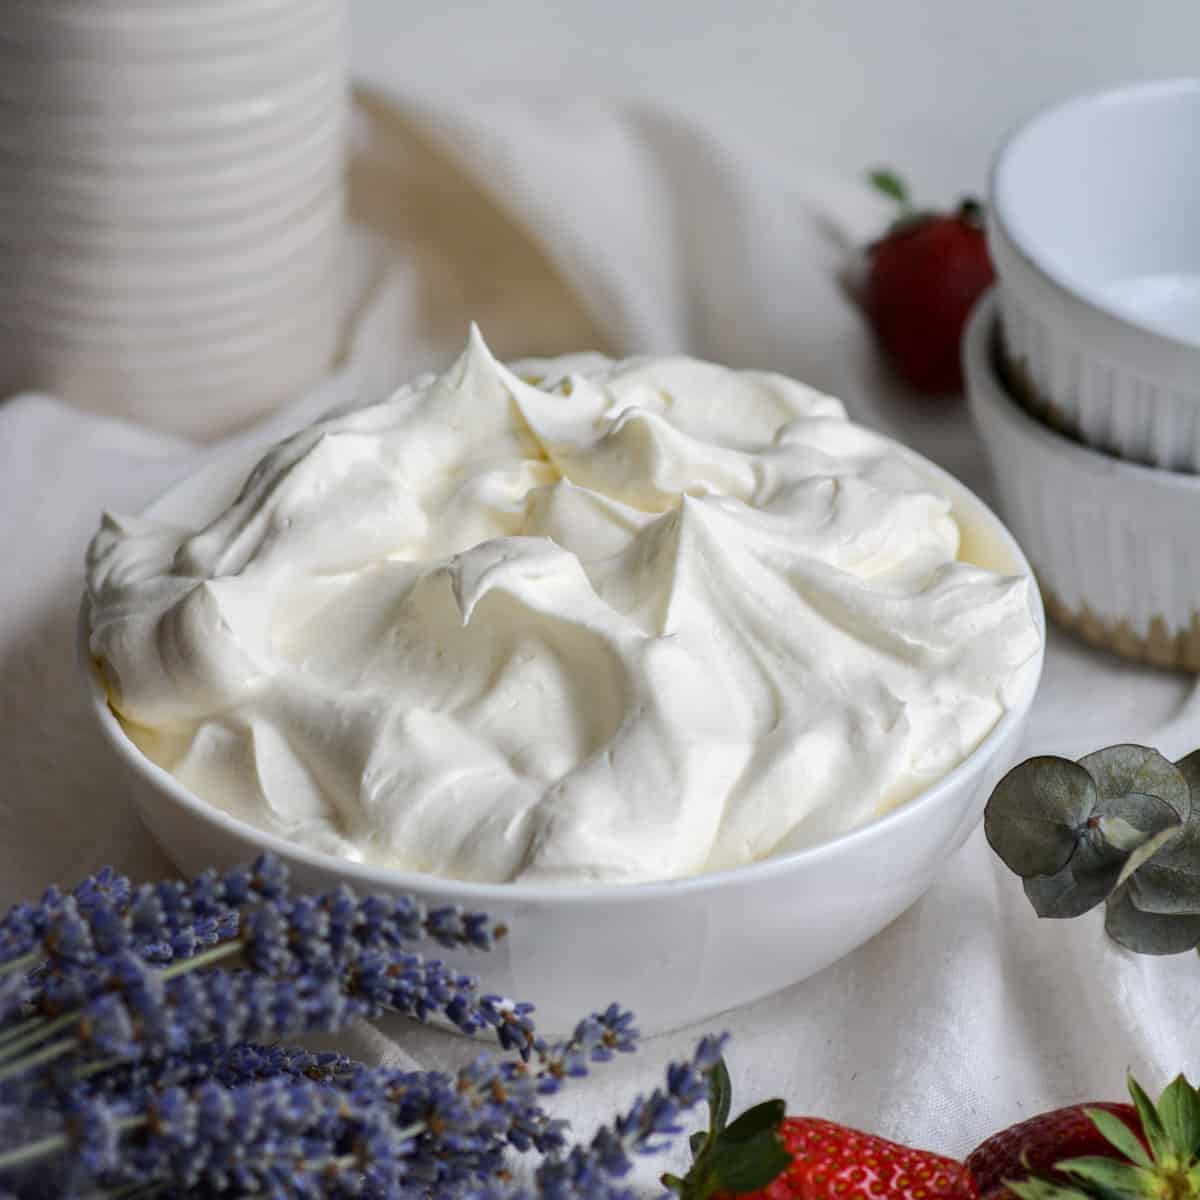 https://earthly-provisions.com/wp-content/uploads/2023/03/Vegan-Whipped-Cream-Frosting.jpg